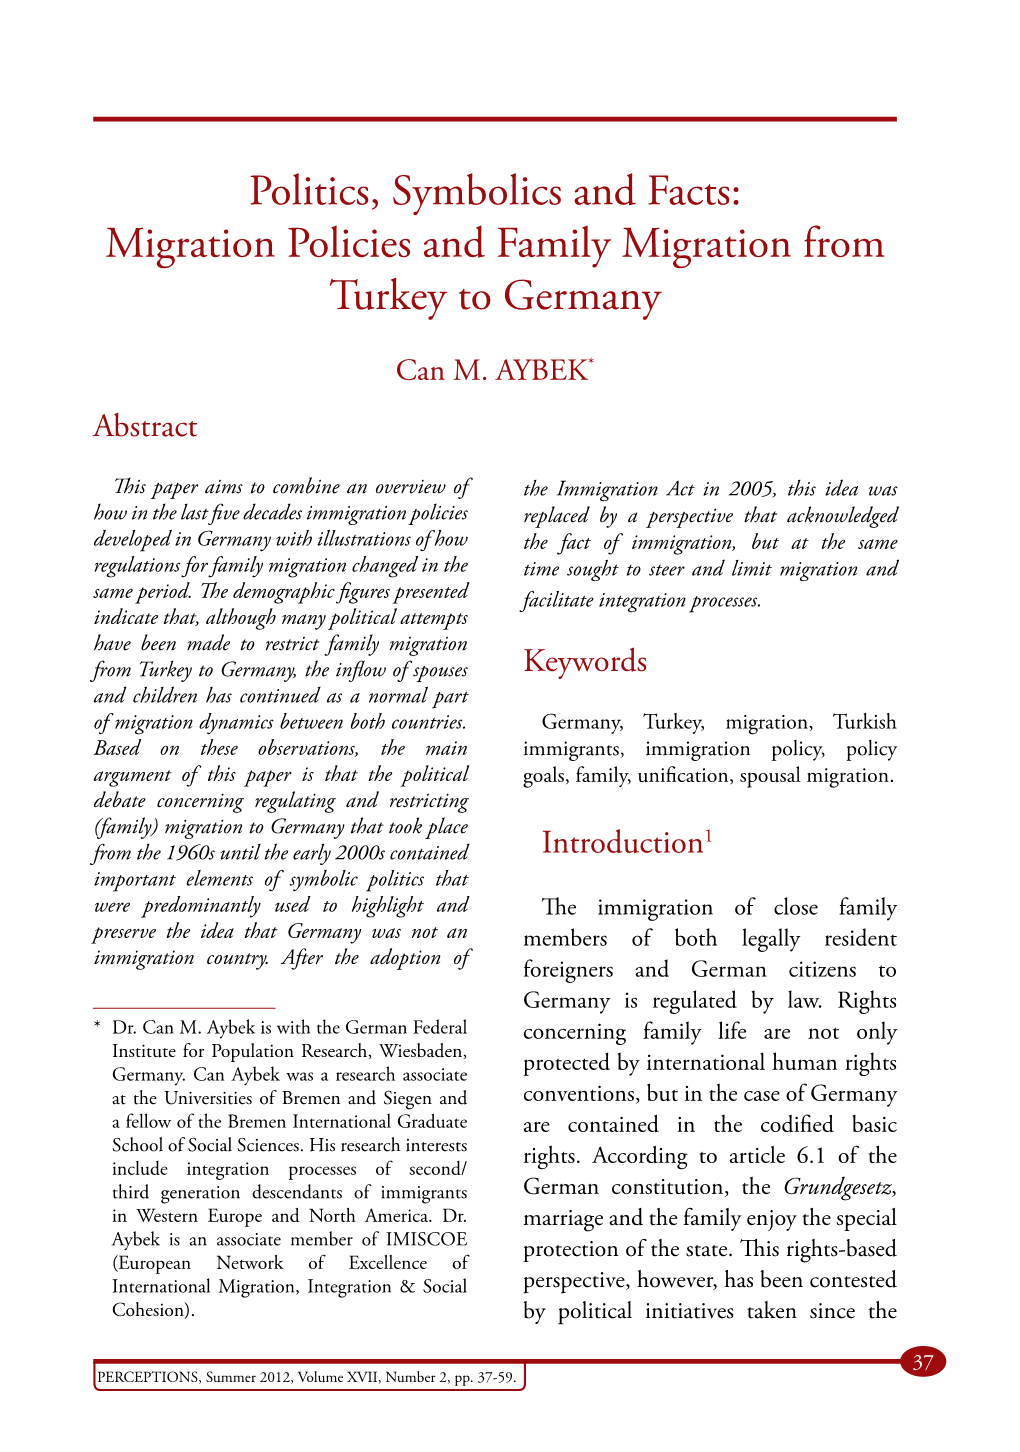 Politics, Symbolics and Facts: Migration Policies and Family Migration from Turkey to Germany